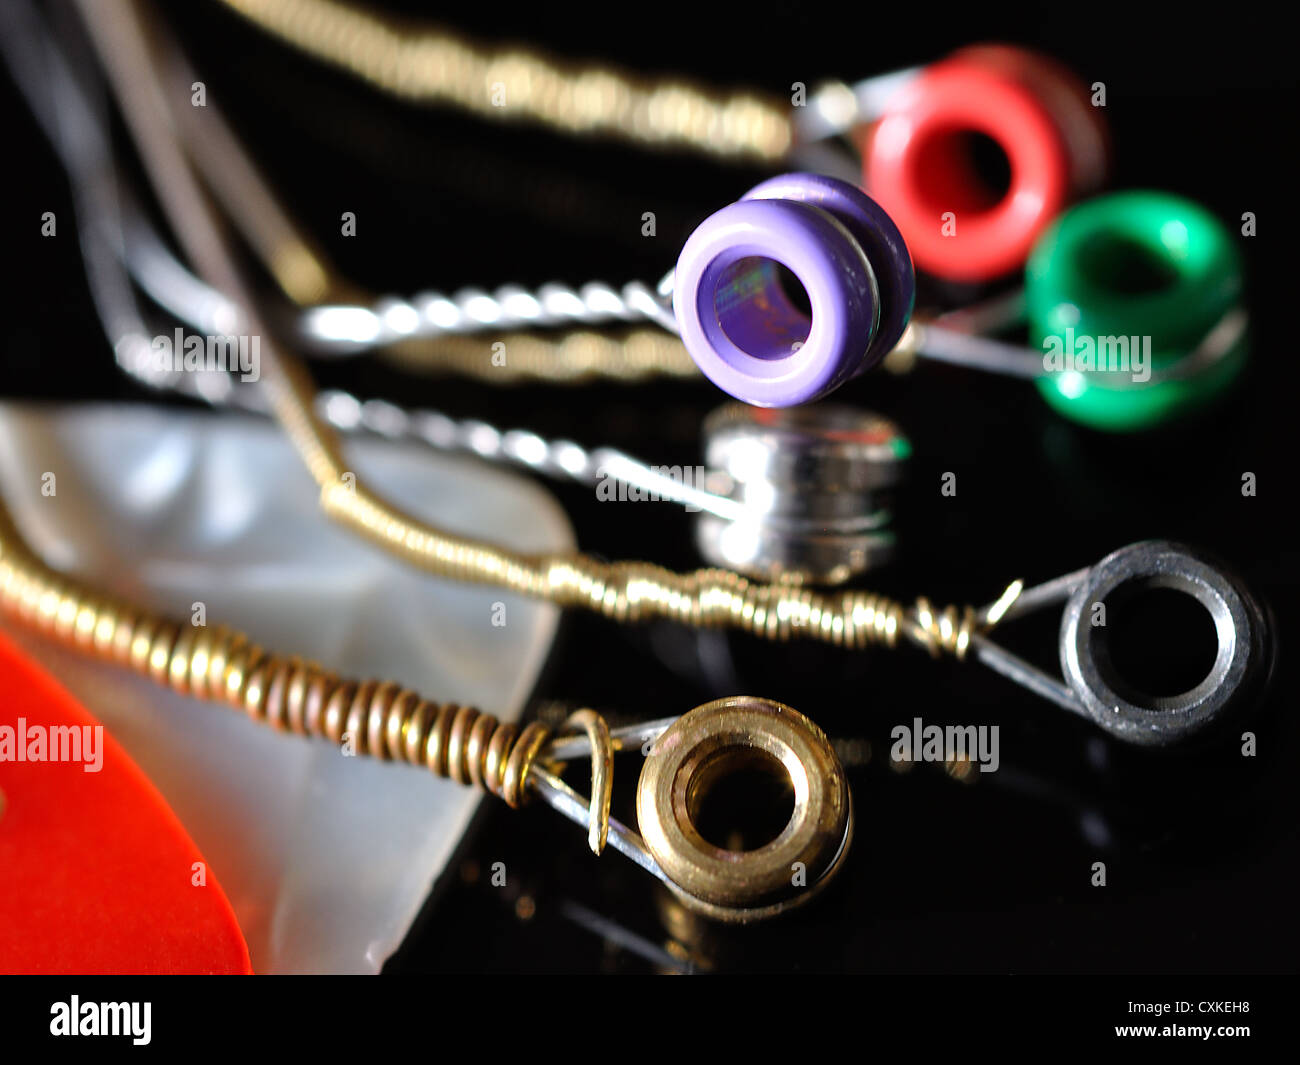 Acoustic copper bronze wound guitar strings with coloured beads for bridge  pins Stock Photo - Alamy